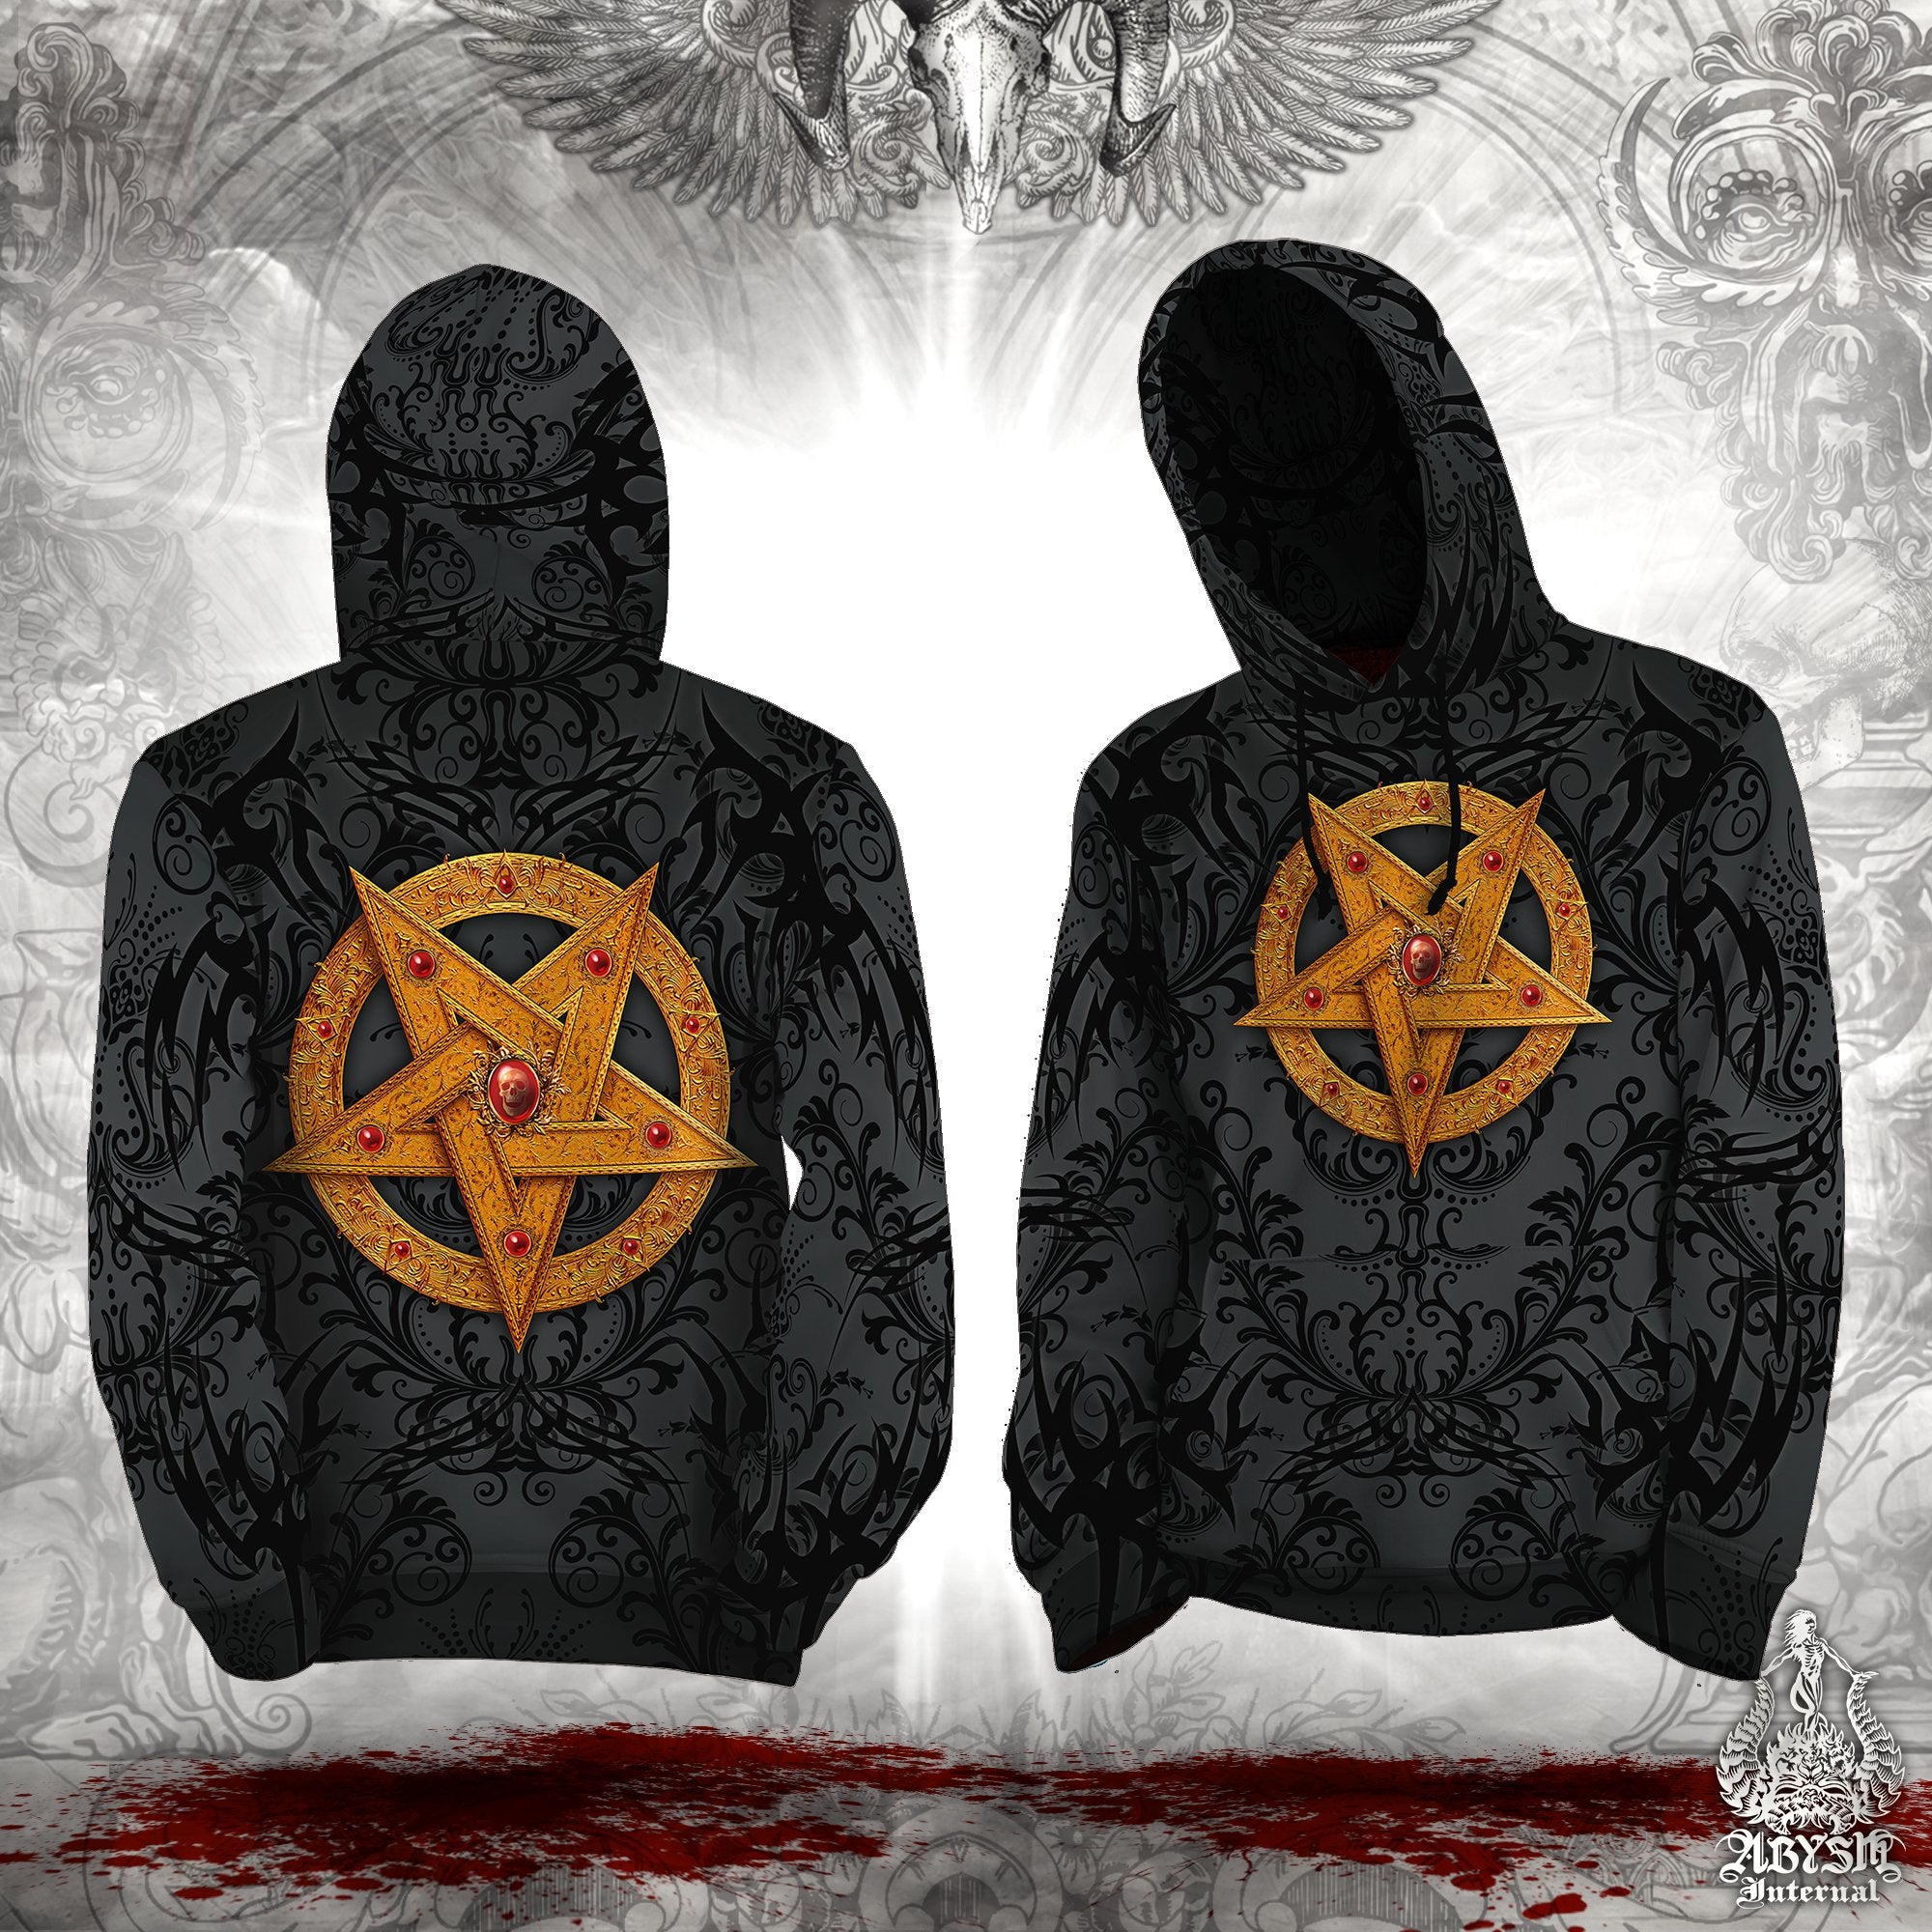 Gold Pentagram Hoodie, Black Metal Streetwear, Gothic Sweater, Satanic Goth Outfit, Alternative Clothing, Unisex - Red or Black, 2 Colors - Abysm Internal